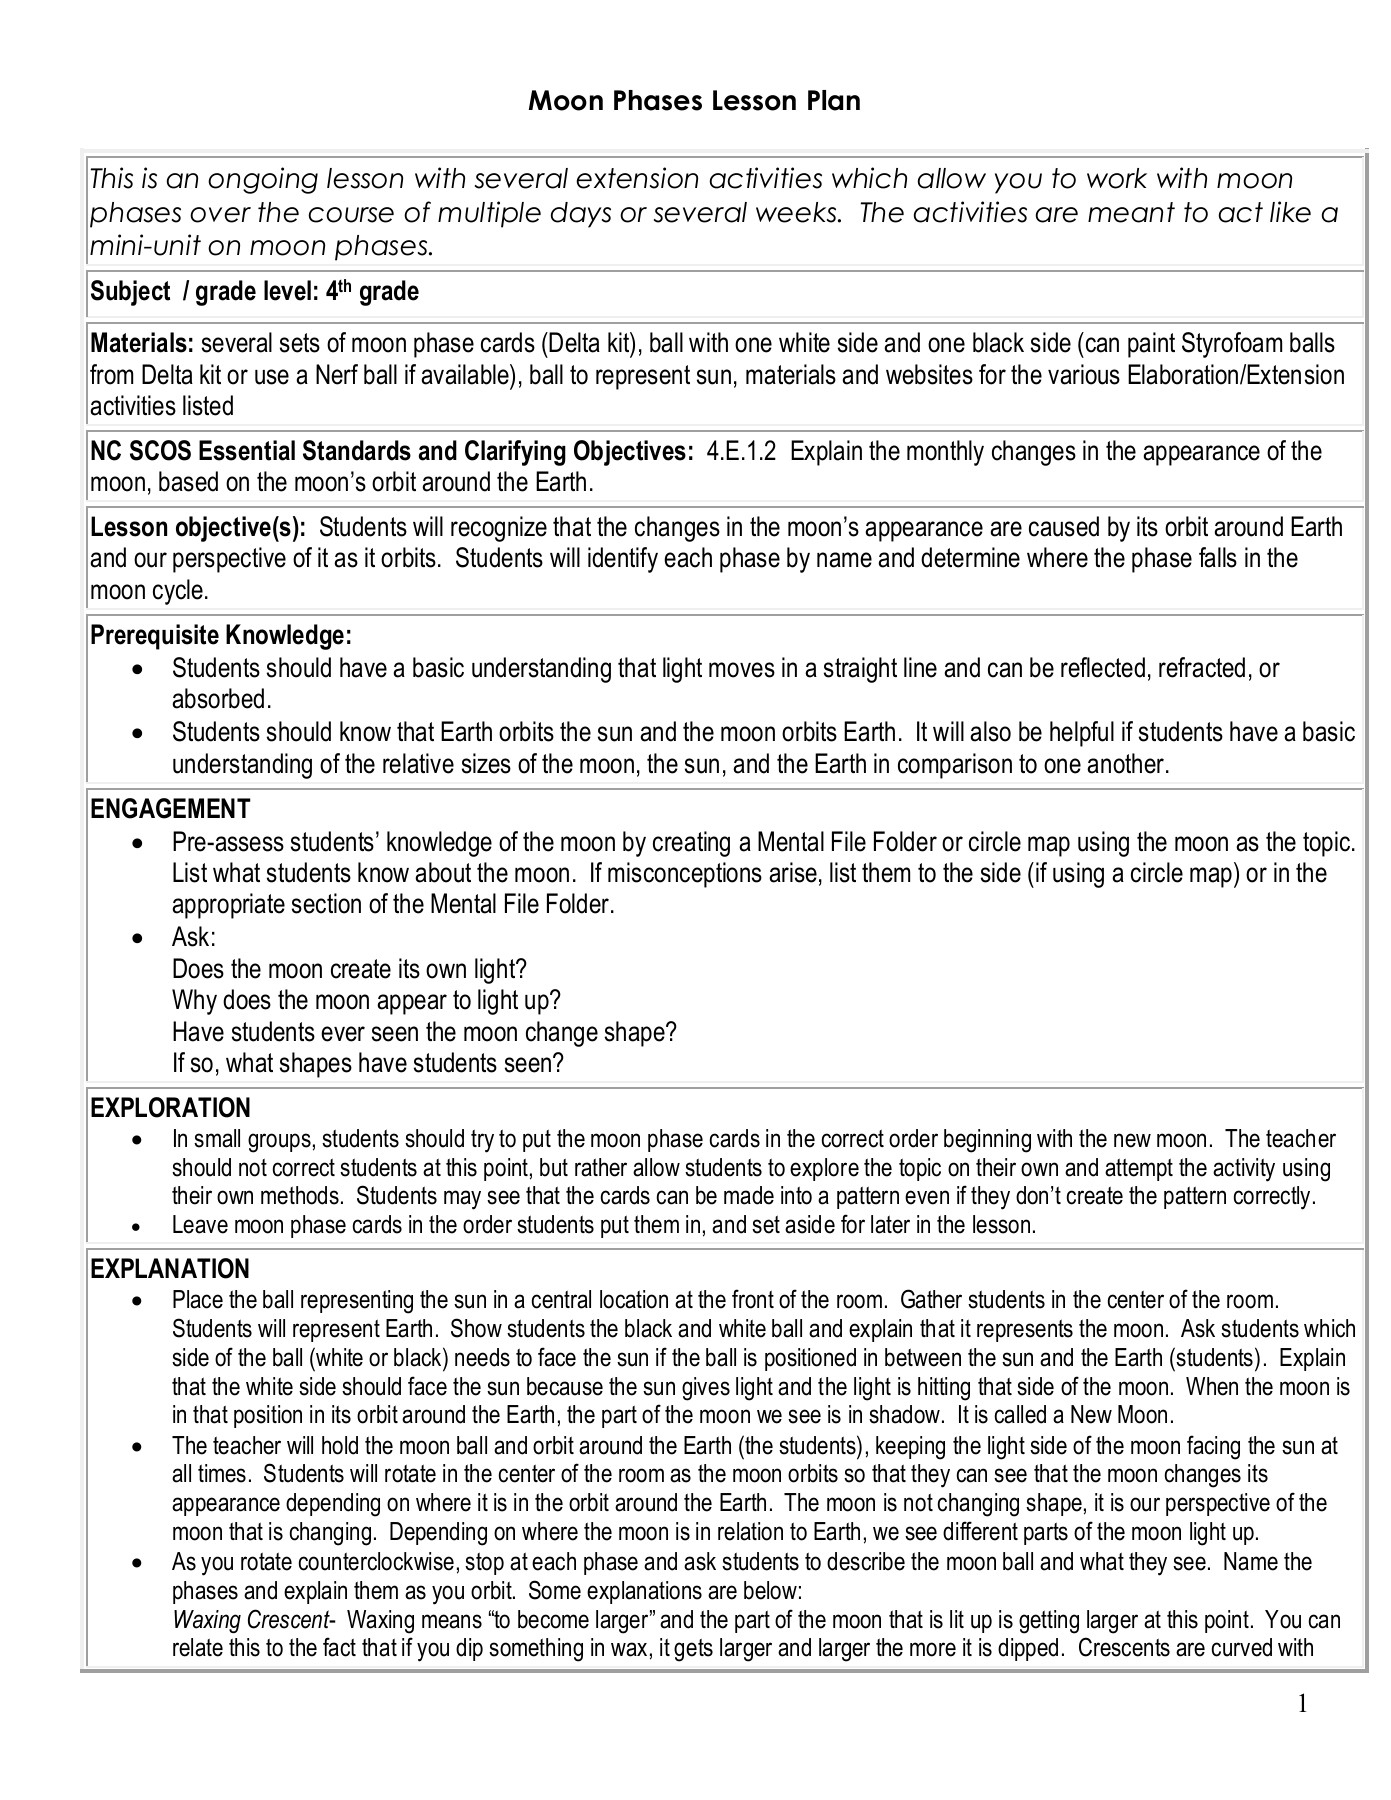 Moon Phases Lesson Plan - Schoolwires Pages 1 - 3 - Text